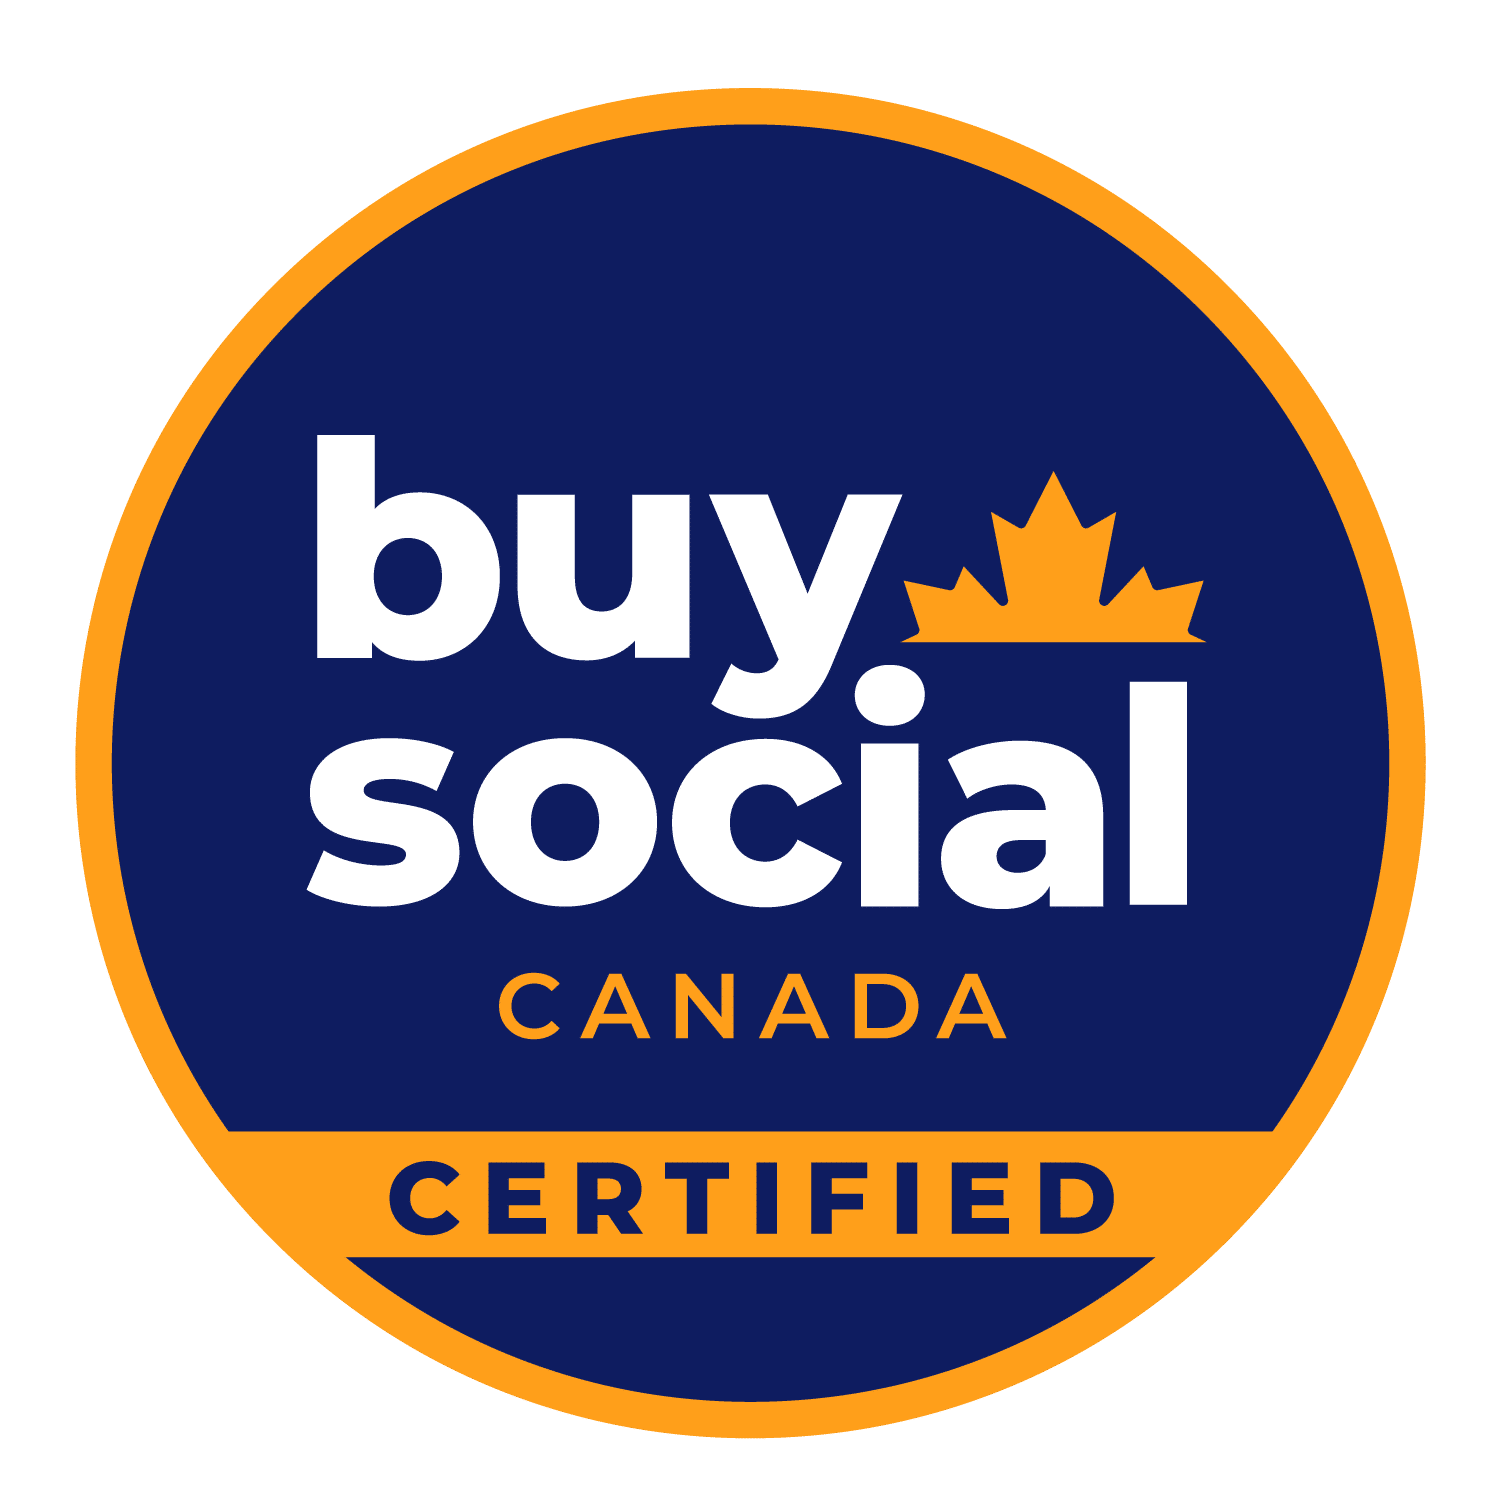 Dark blue circle with text reading "Buy Social Canada Certified"